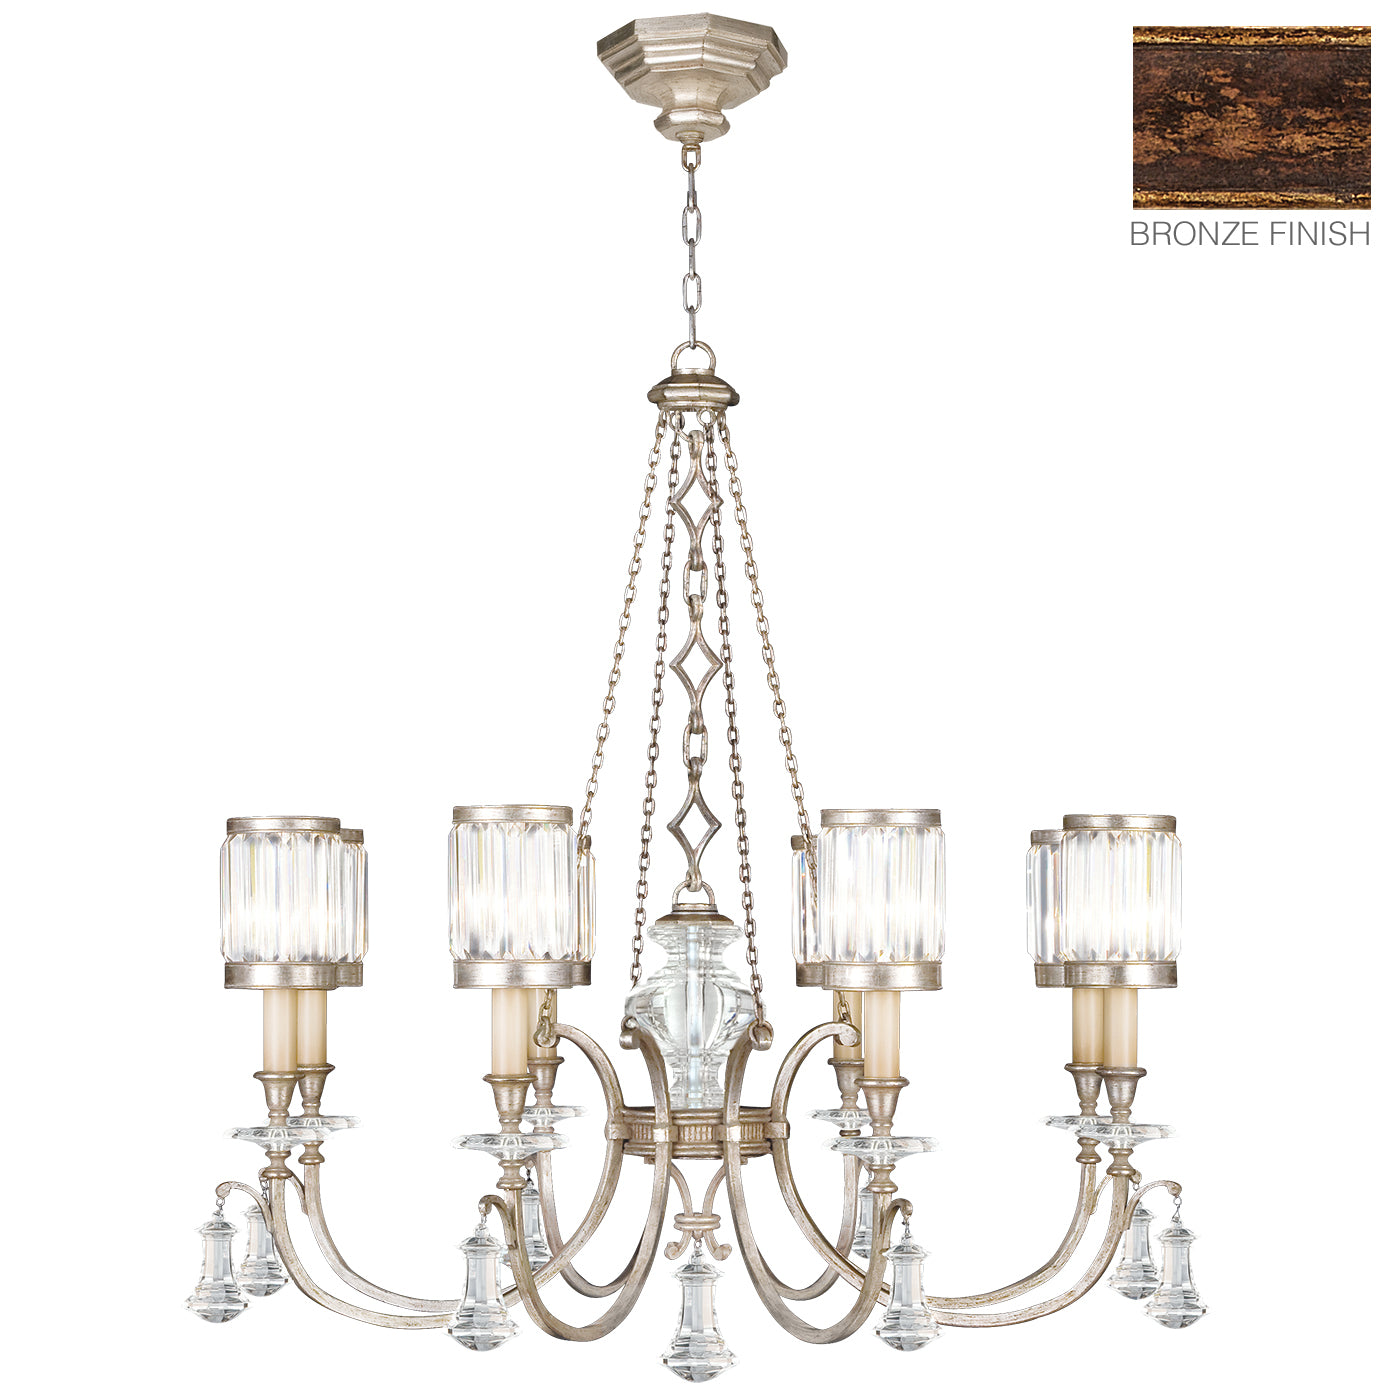 Fine Art Handcrafted Lighting Eaton Place Chandelier Chandeliers Fine Art Handcrafted Lighting Bronze 43 x 42 